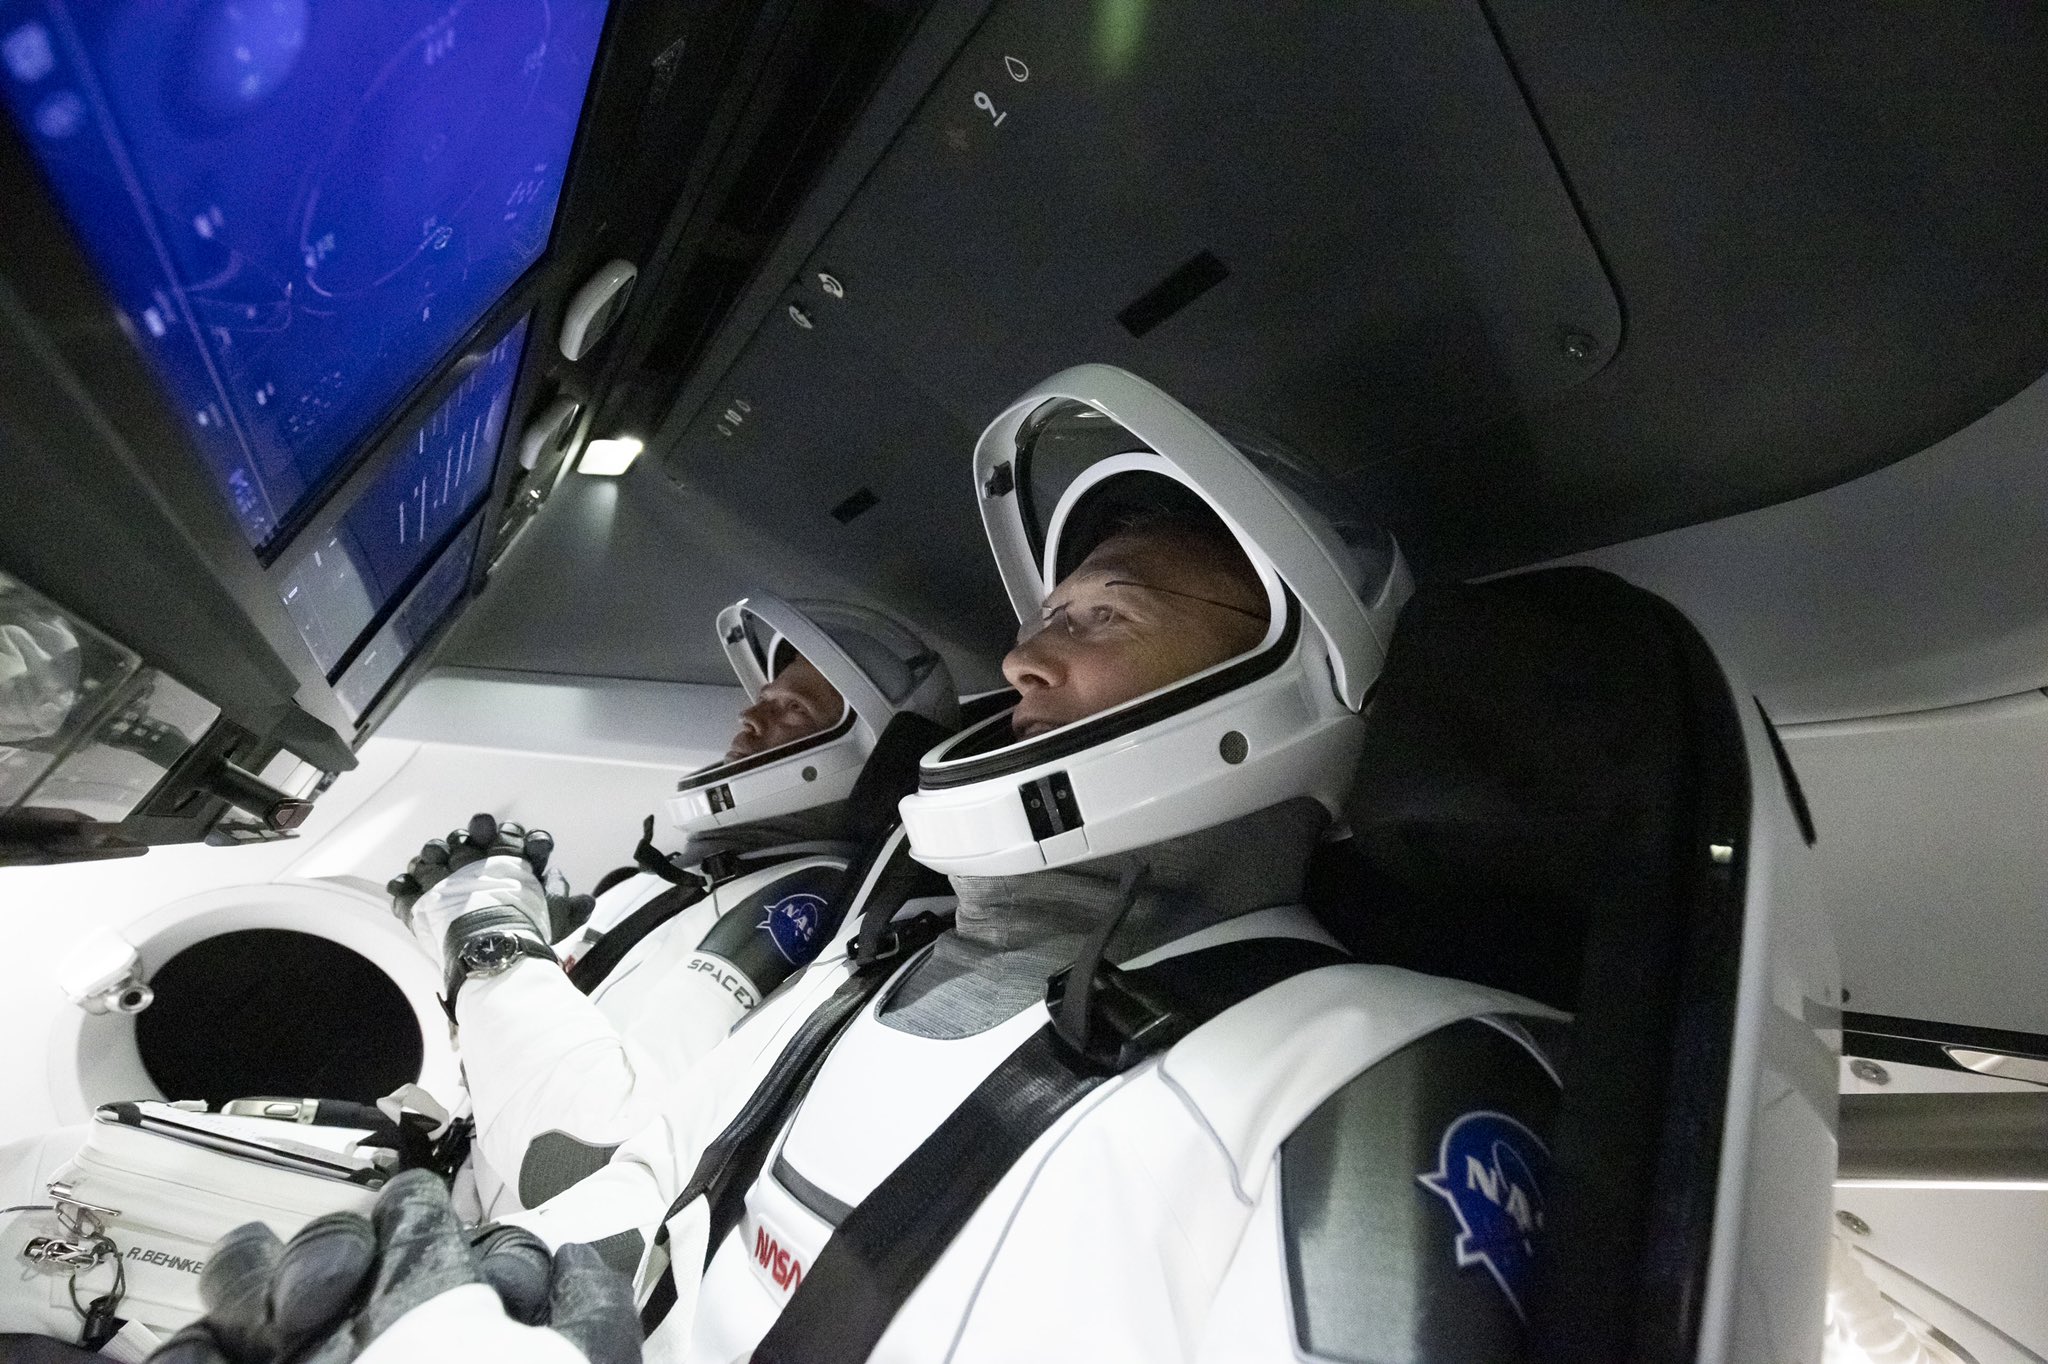 Boy Genius Elon Musk Is Attempting To Blast Man Into Space Tomorrow & Here’s How To Watch